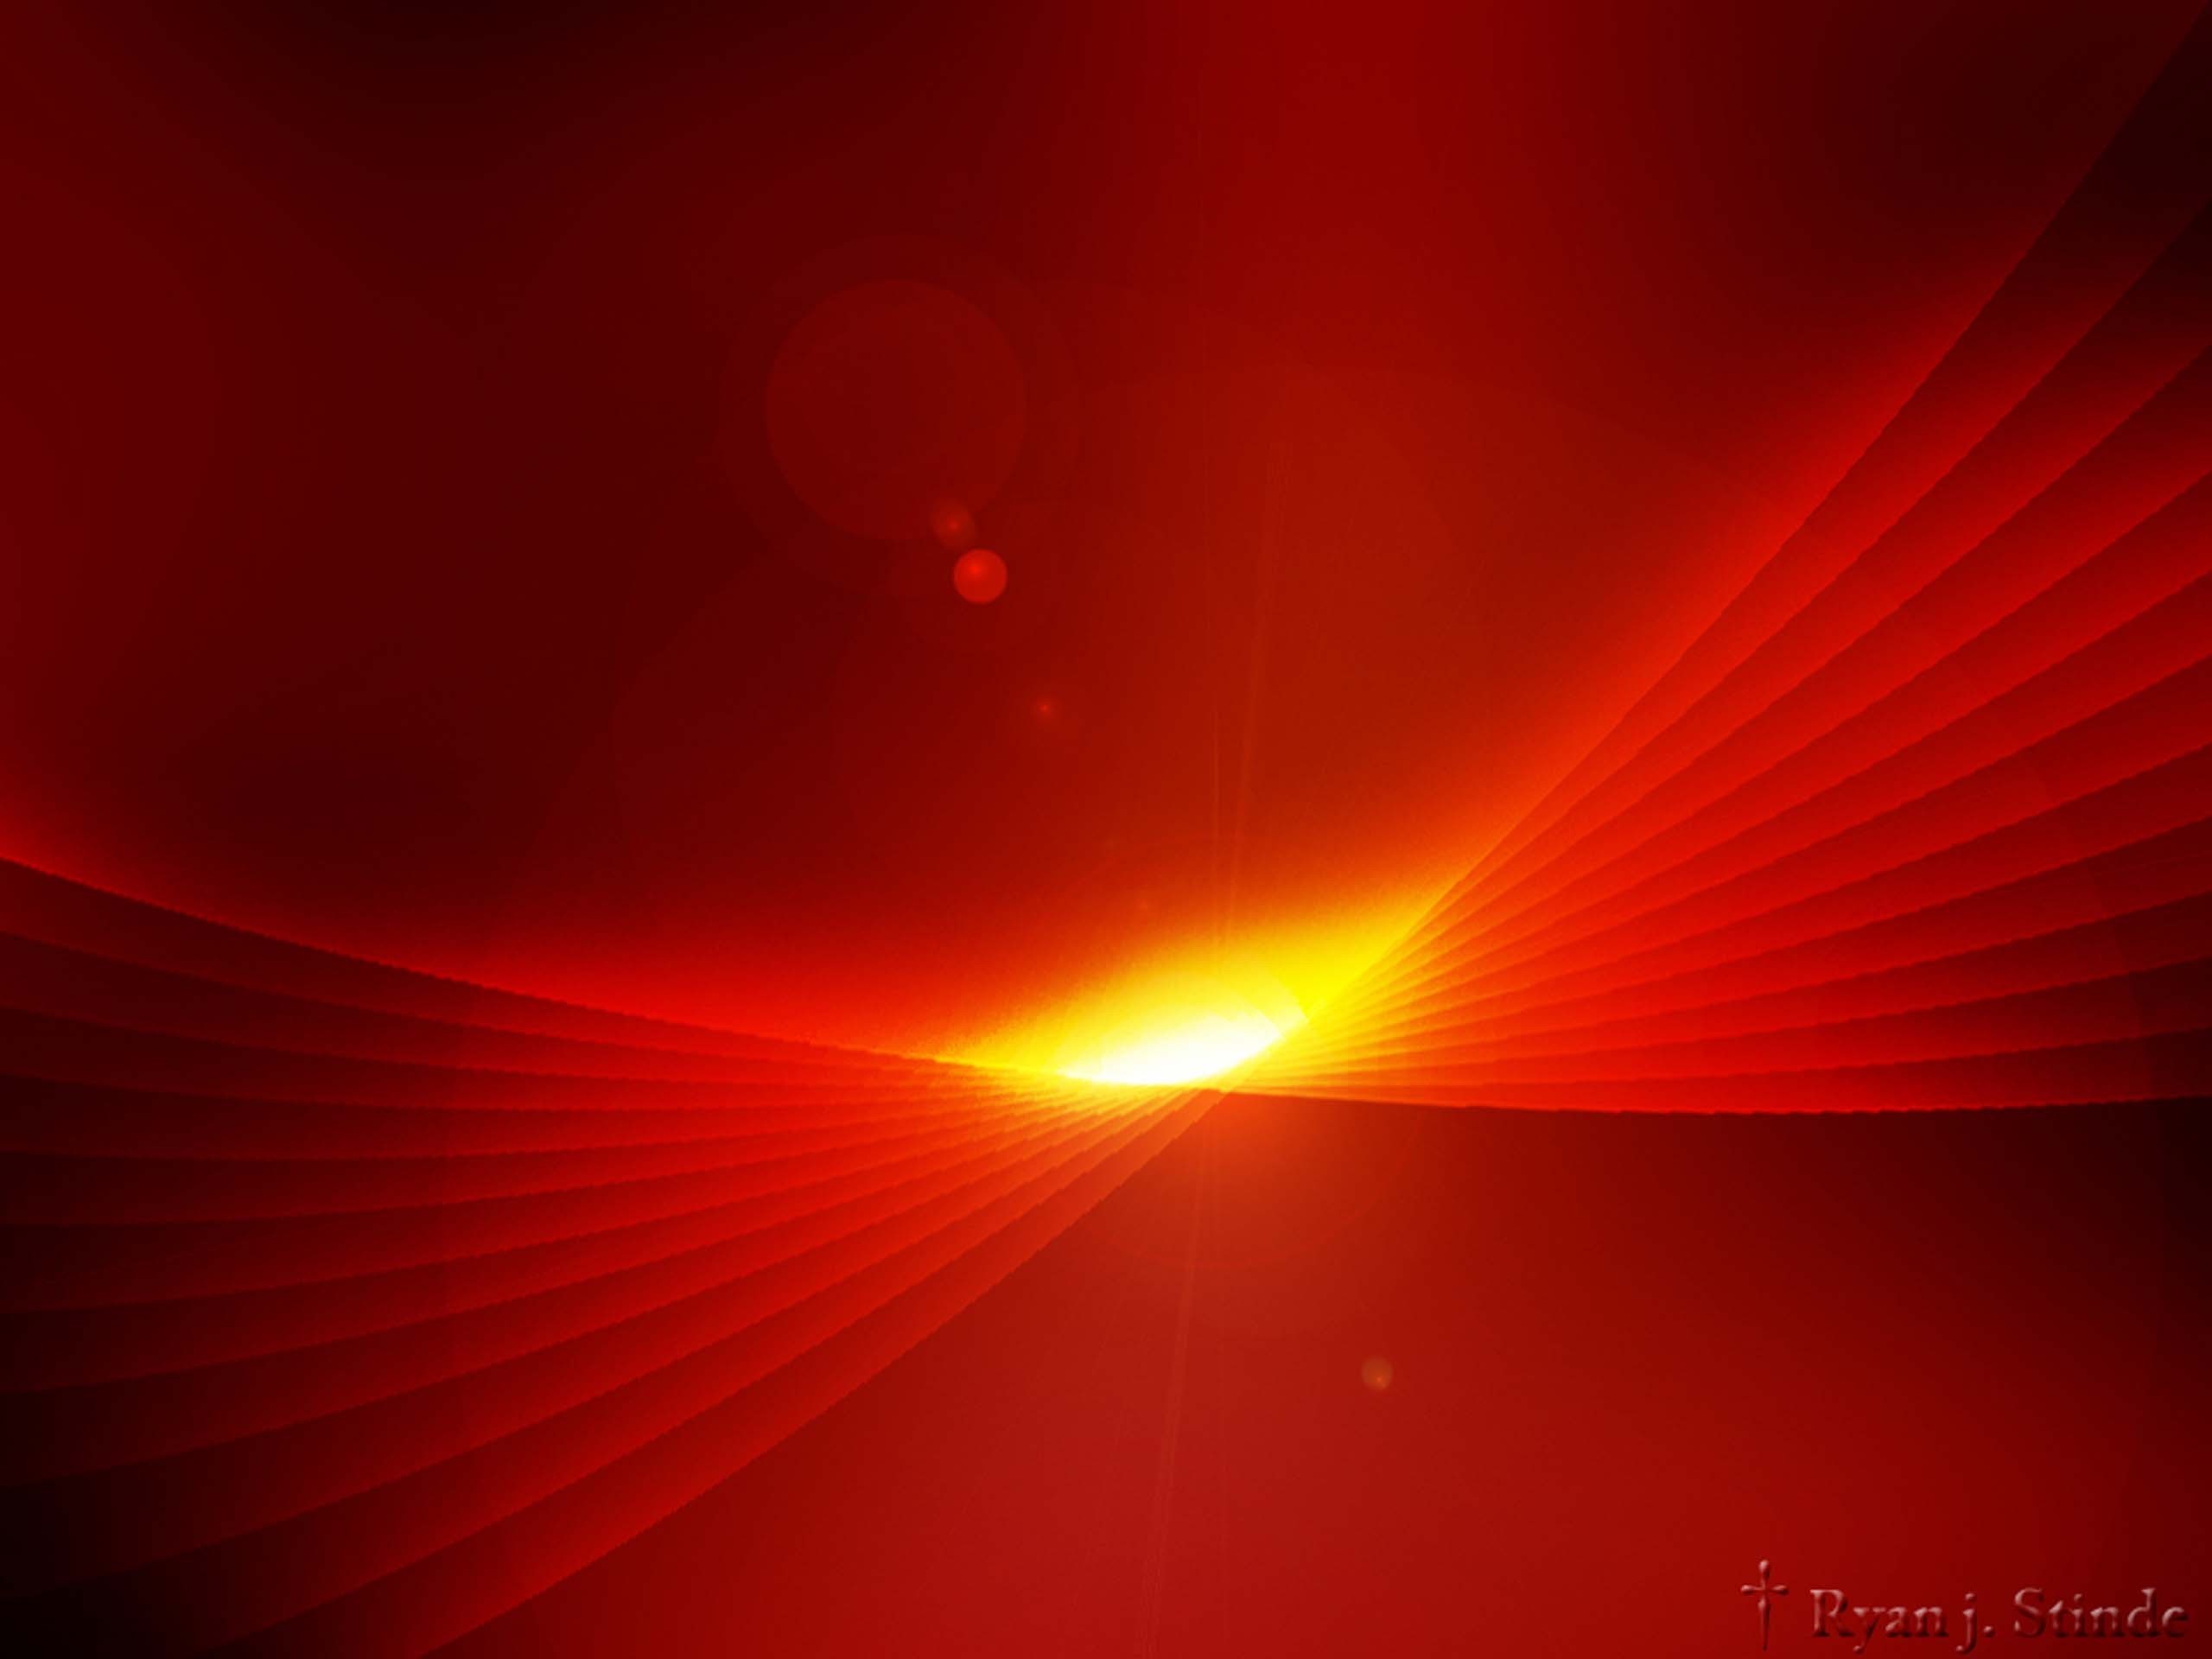 2560x1920   Red light desktop PC and Mac wallpaper Â· Download Â·  Abstract Light Red Wallpapers Iphone Free Download Wallpapers Background ...